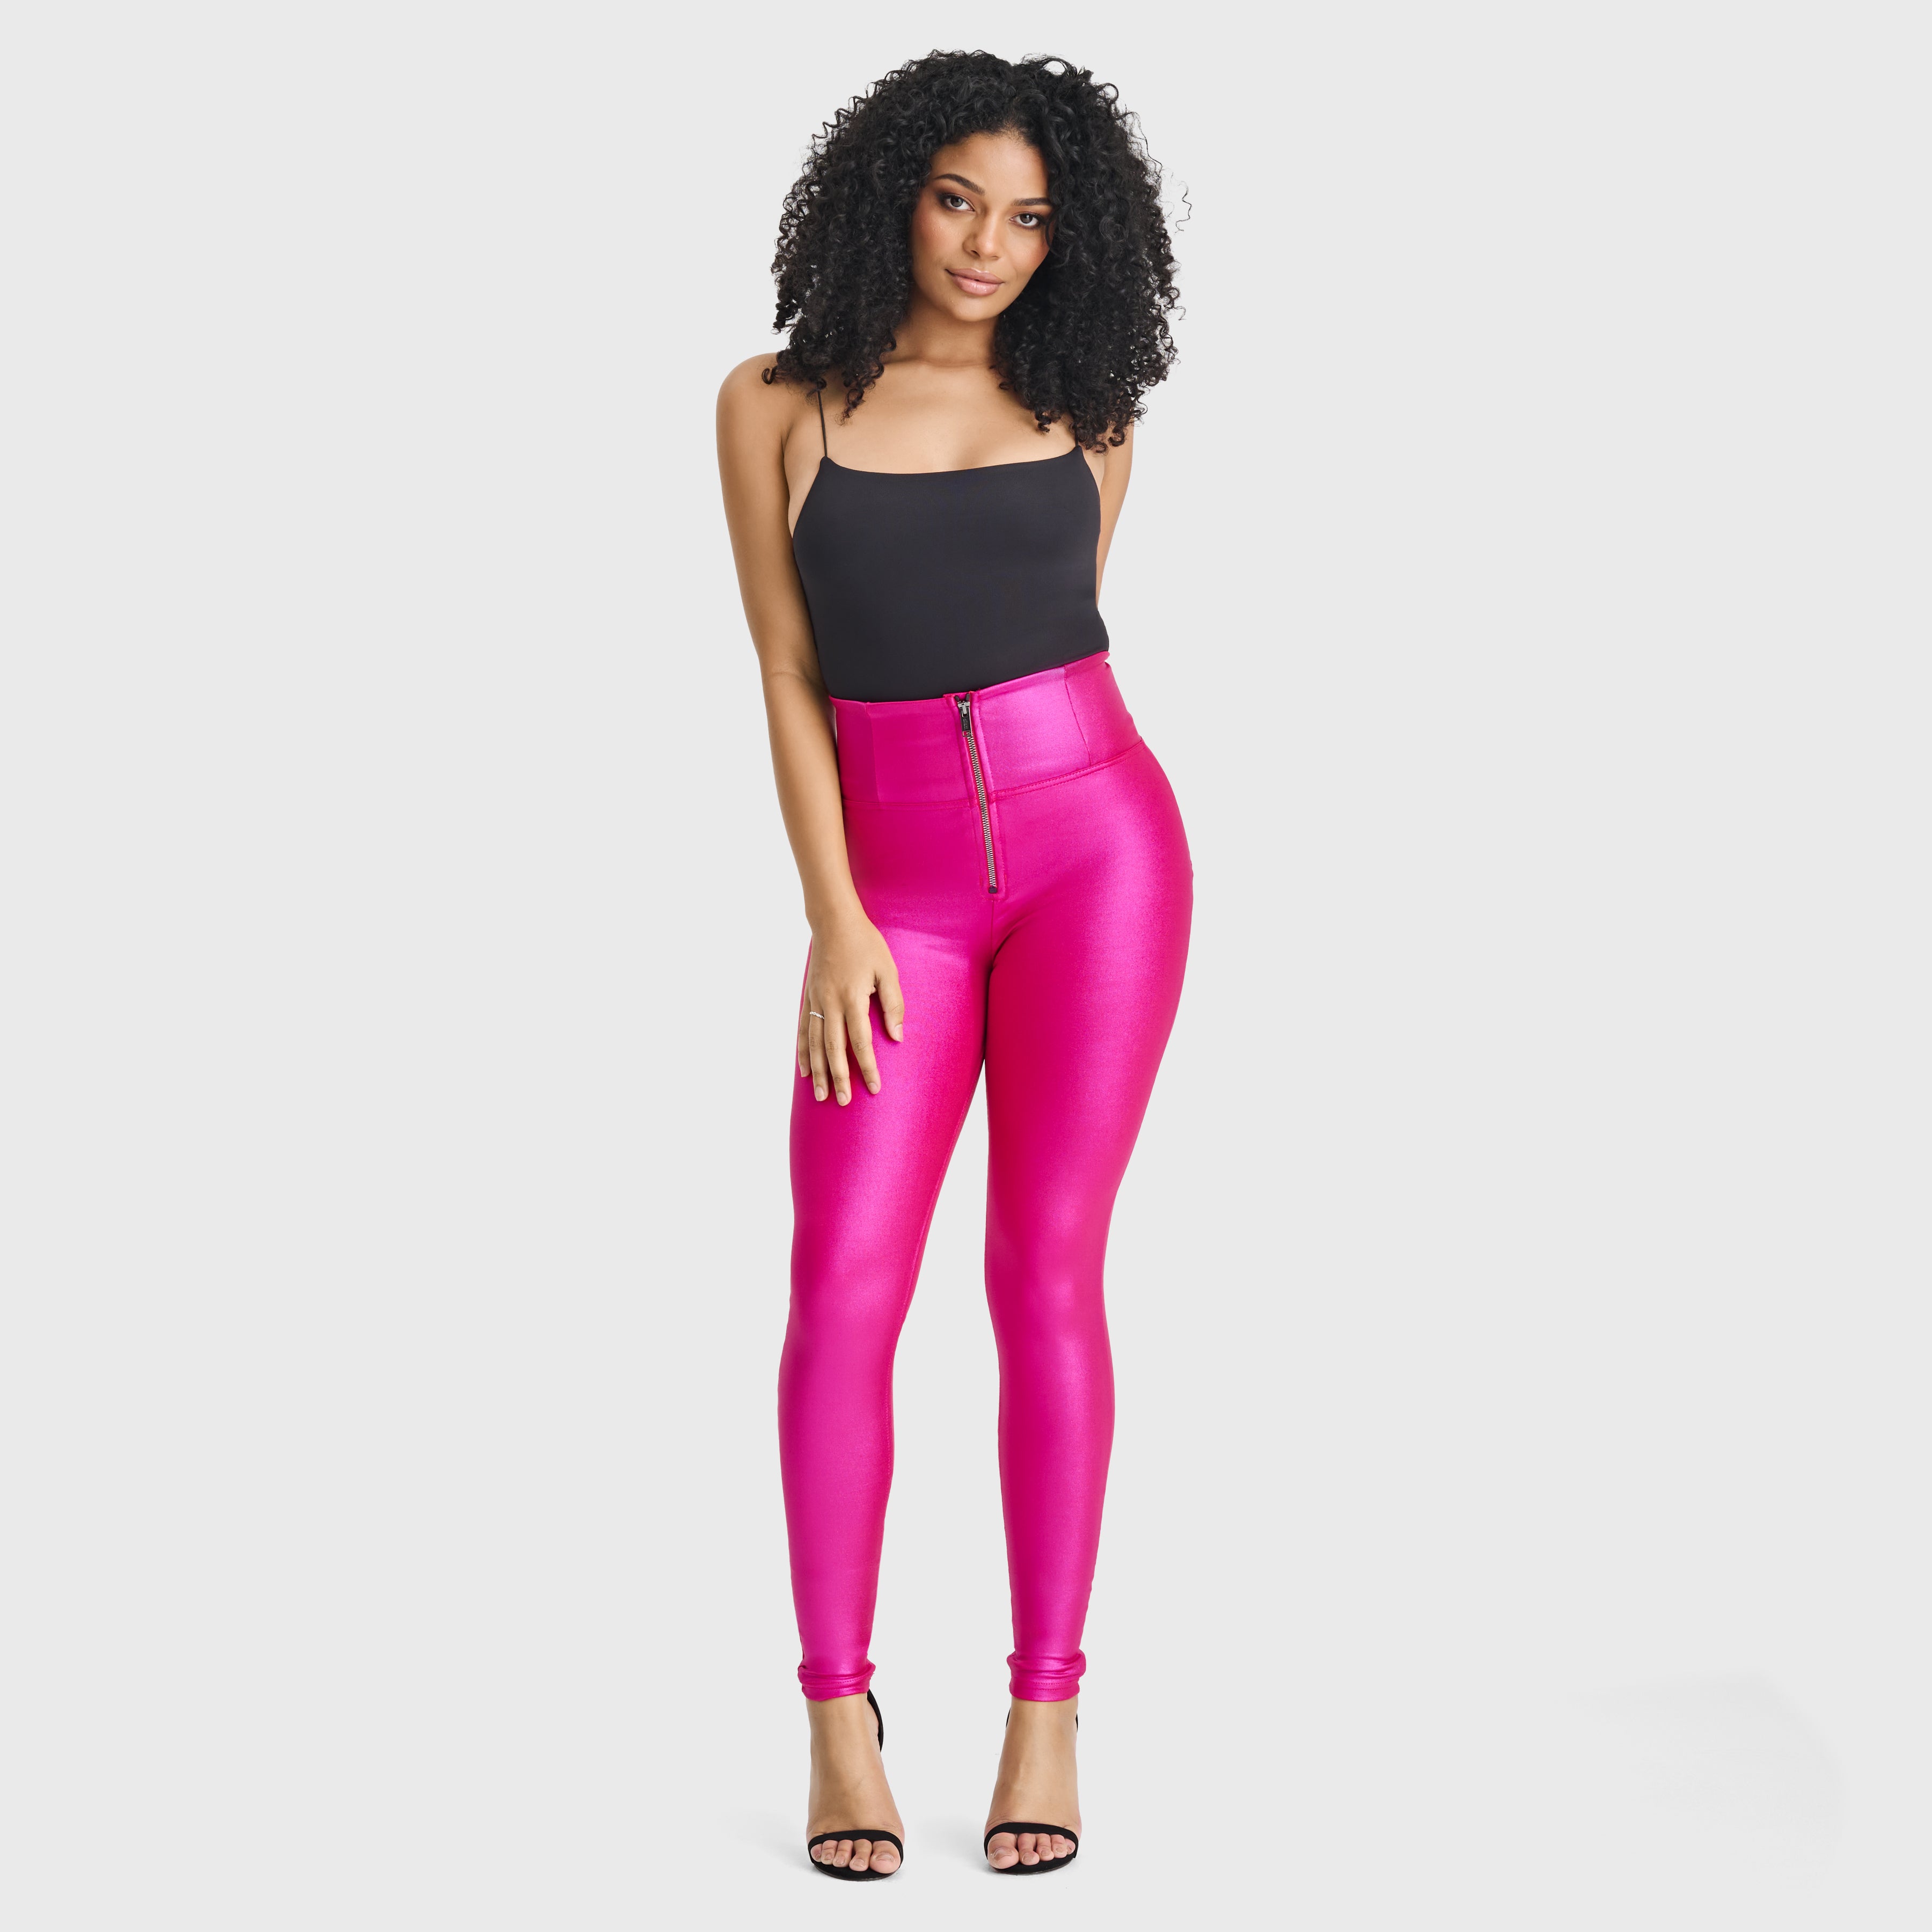 WR.UP® Disco Pants - Super High Waisted - Full Length - Hot Pink 2